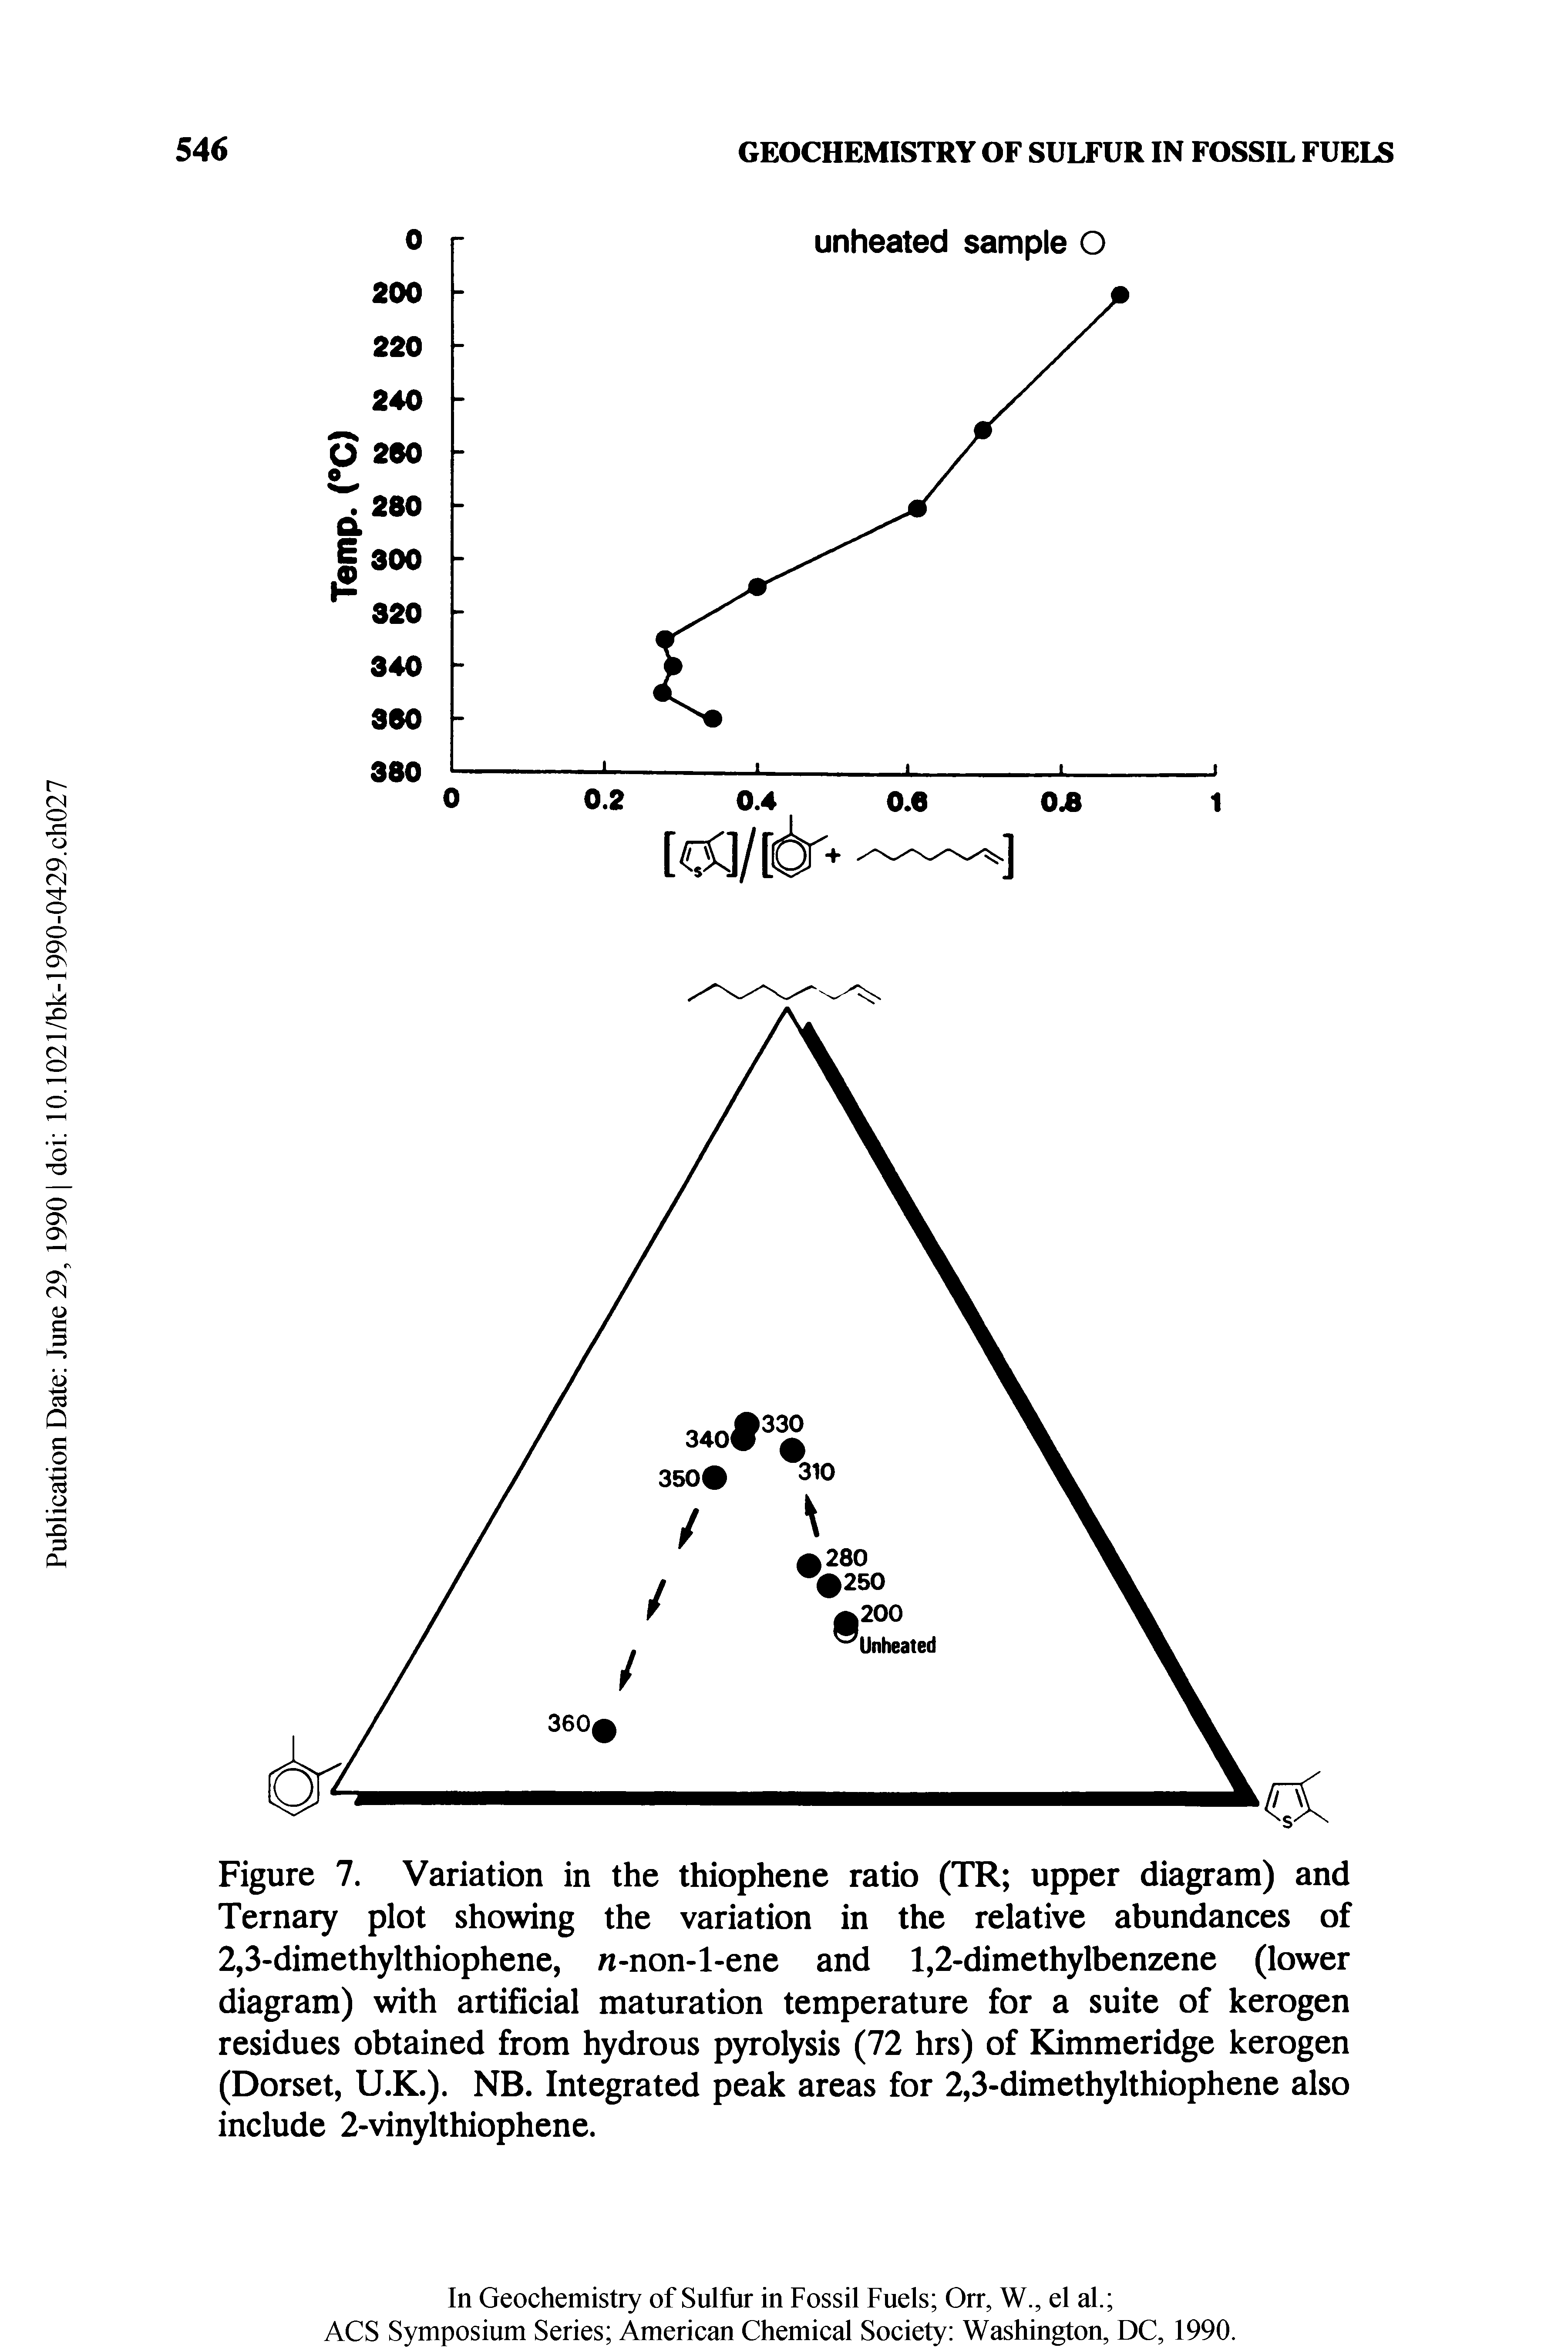 Figure 7. Variation in the thiophene ratio (TR upper diagram) and Ternary plot showing the variation in the relative abundances of 2,3-dimethylthiophene, n-non-l-ene and 1,2-dimethylbenzene (lower diagram) with artificial maturation temperature for a suite of kerogen residues obtained from hydrous pyrolysis (72 hrs) of Kimmeridge kerogen (Dorset, U.K.). NB. Integrated peak areas for 2,3-dimethylthiophene also include 2-vinylthiophene.